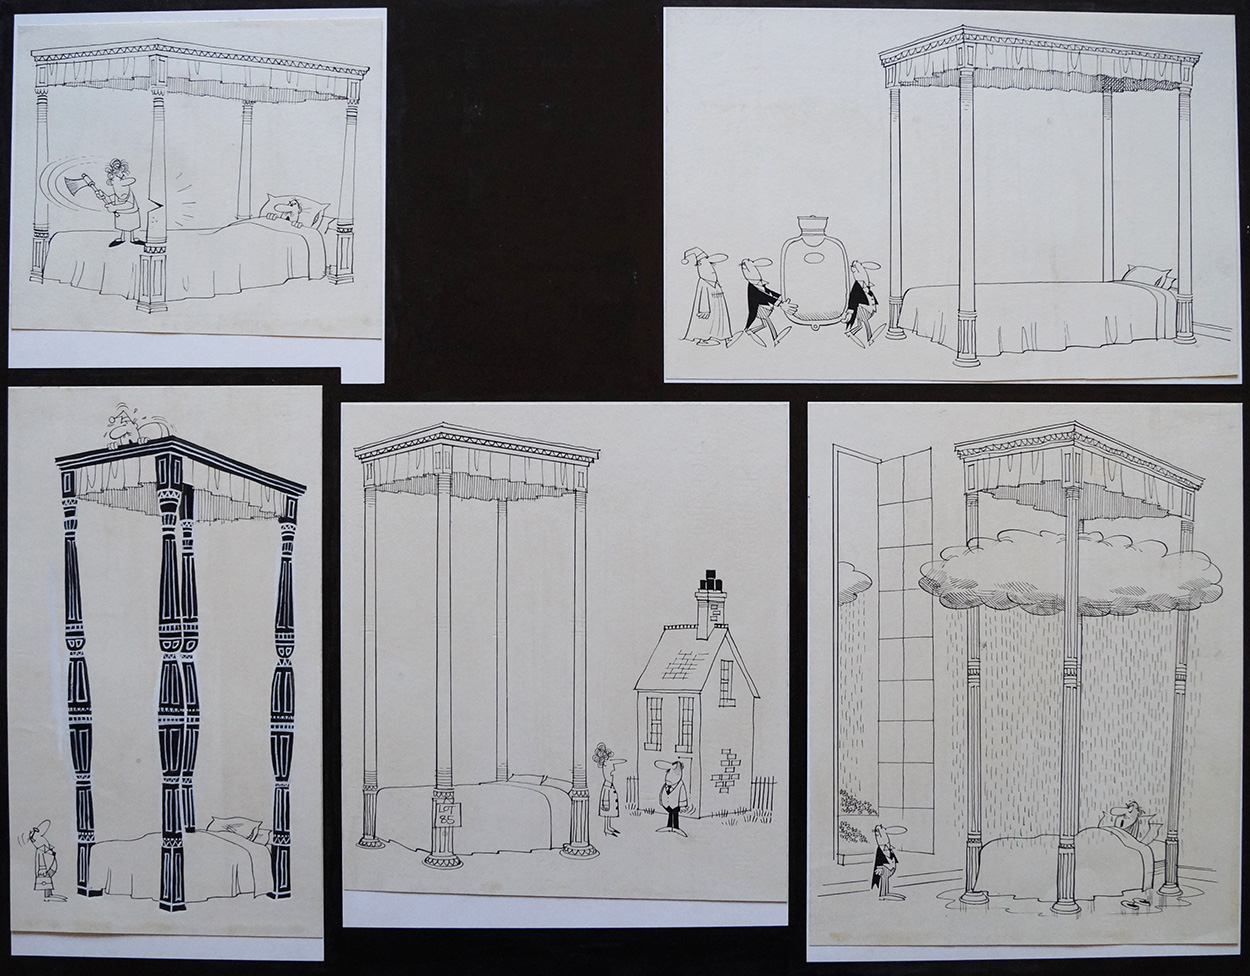 Fun with Fiddy: Four Poster Escapades! (Original) art by Roland Fiddy at The Illustration Art Gallery